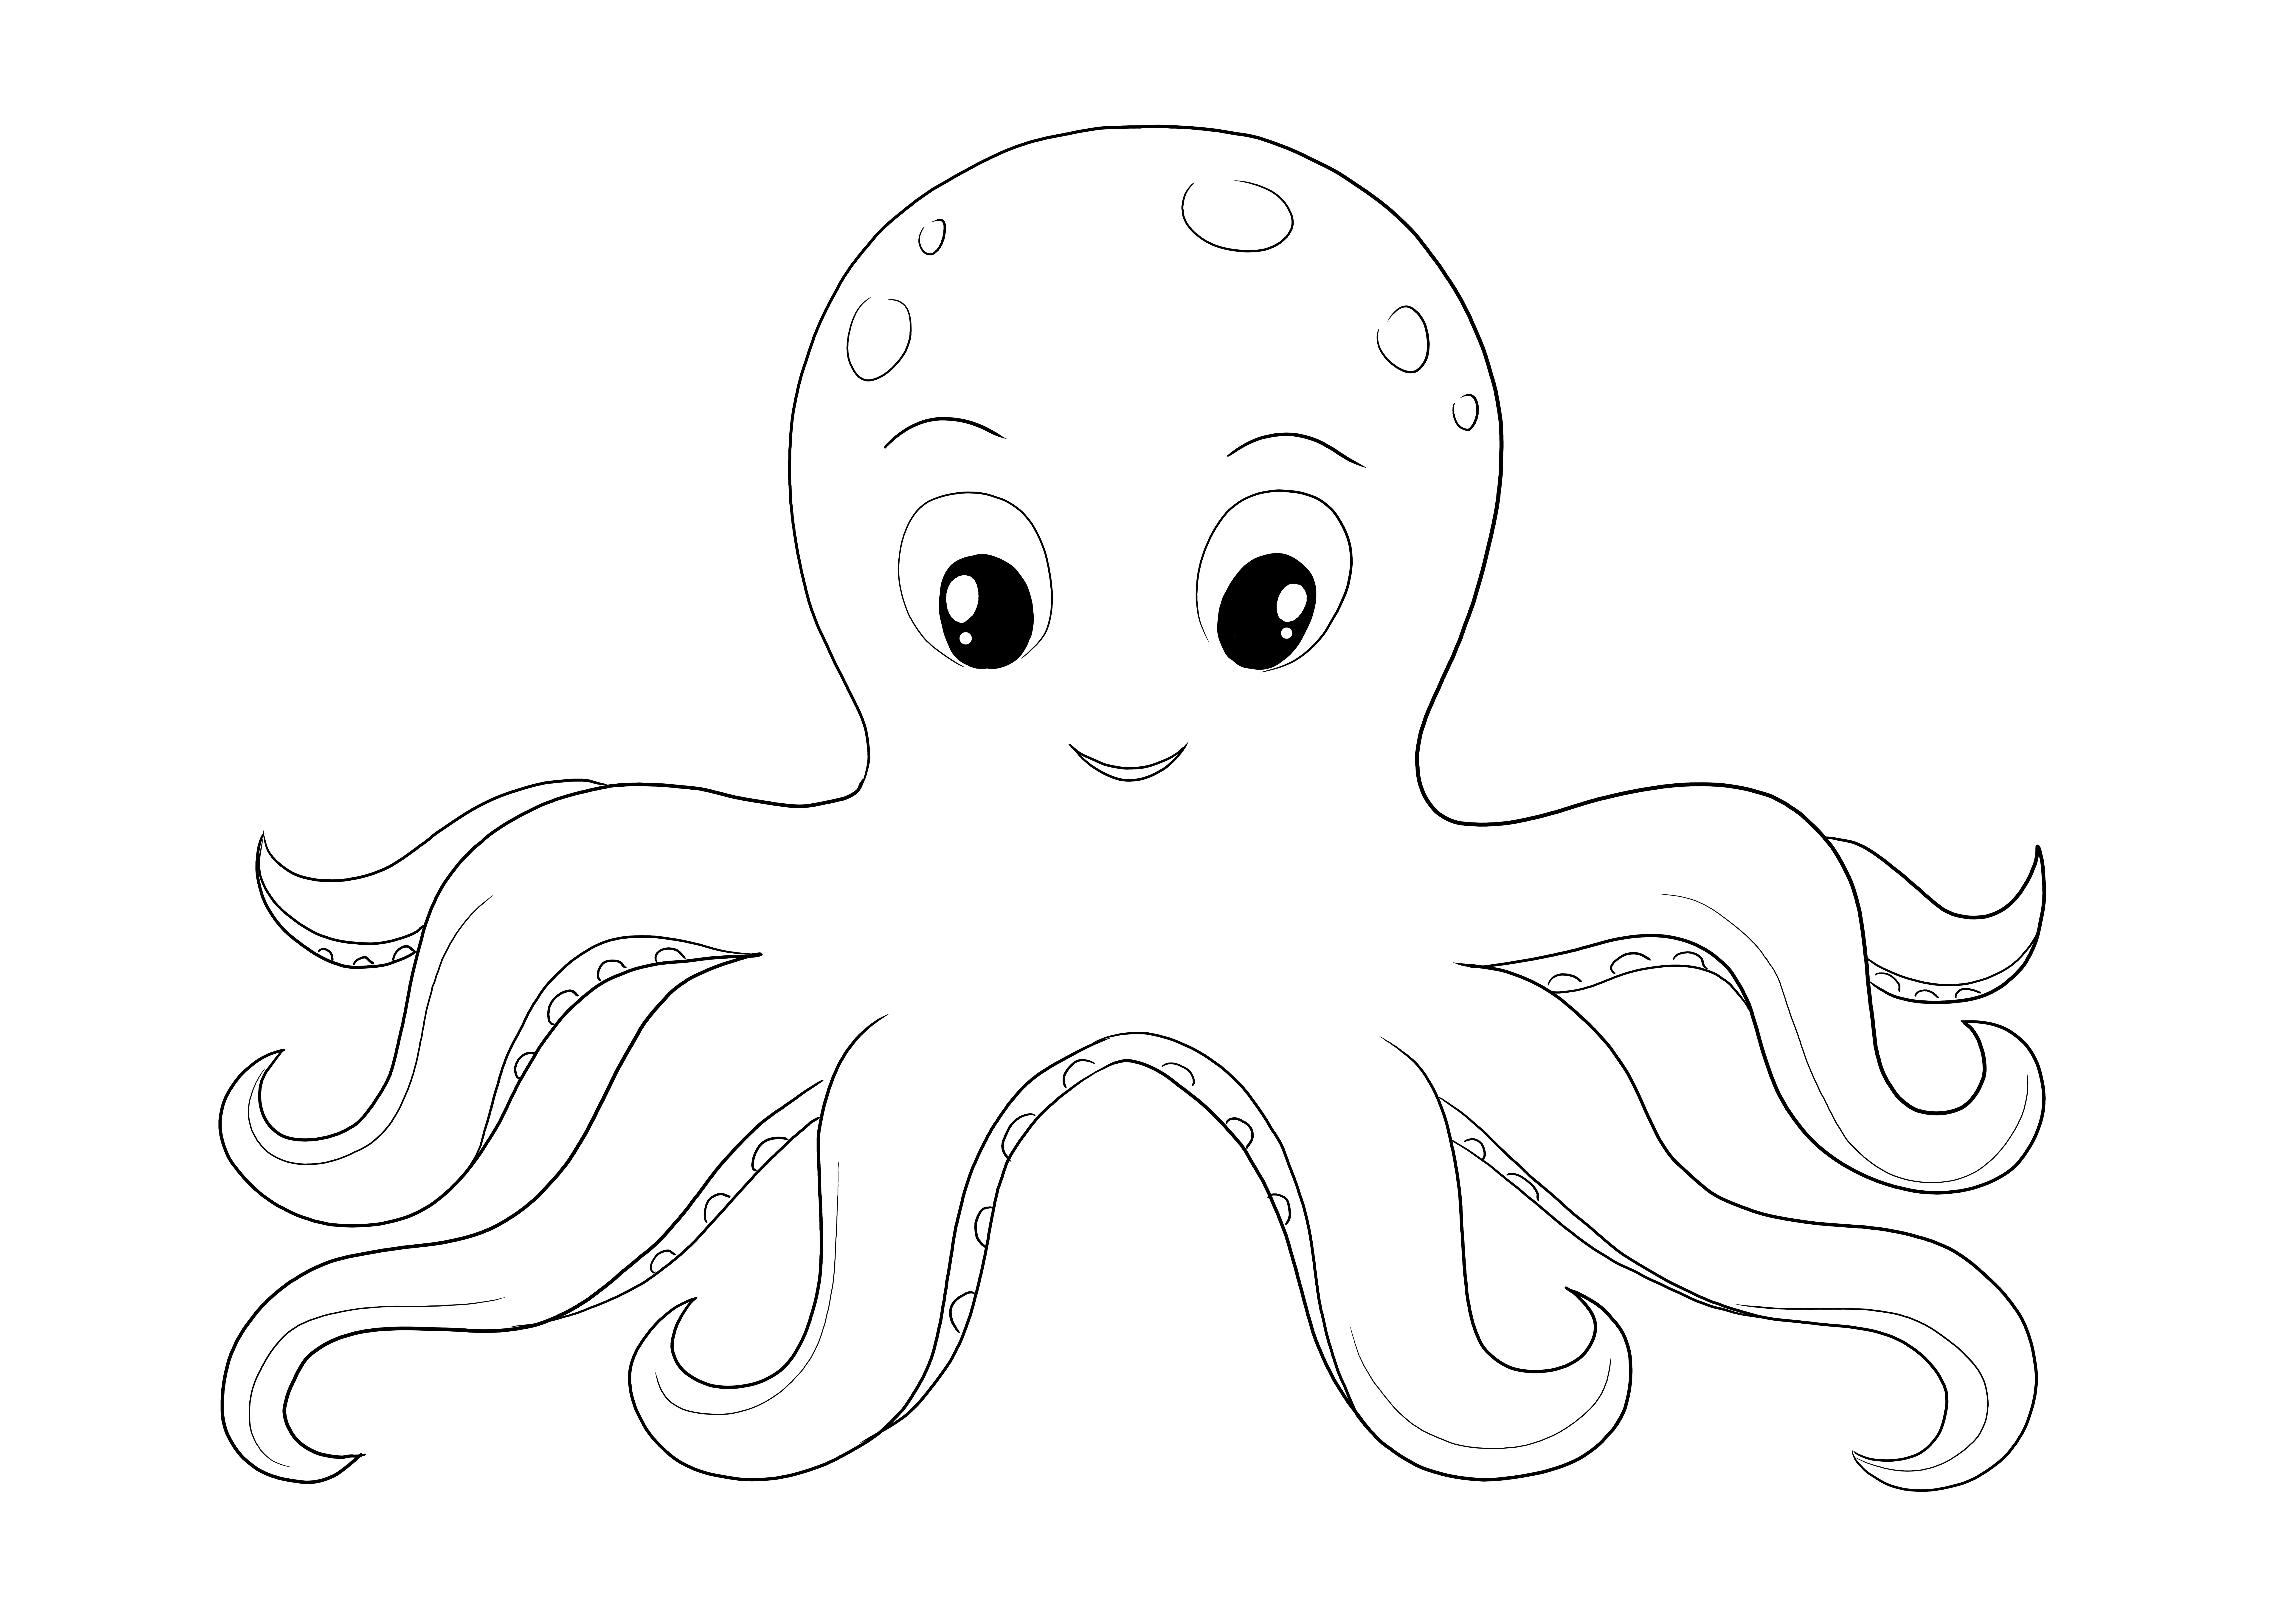 Free Octopus coloring page to print and simple to color